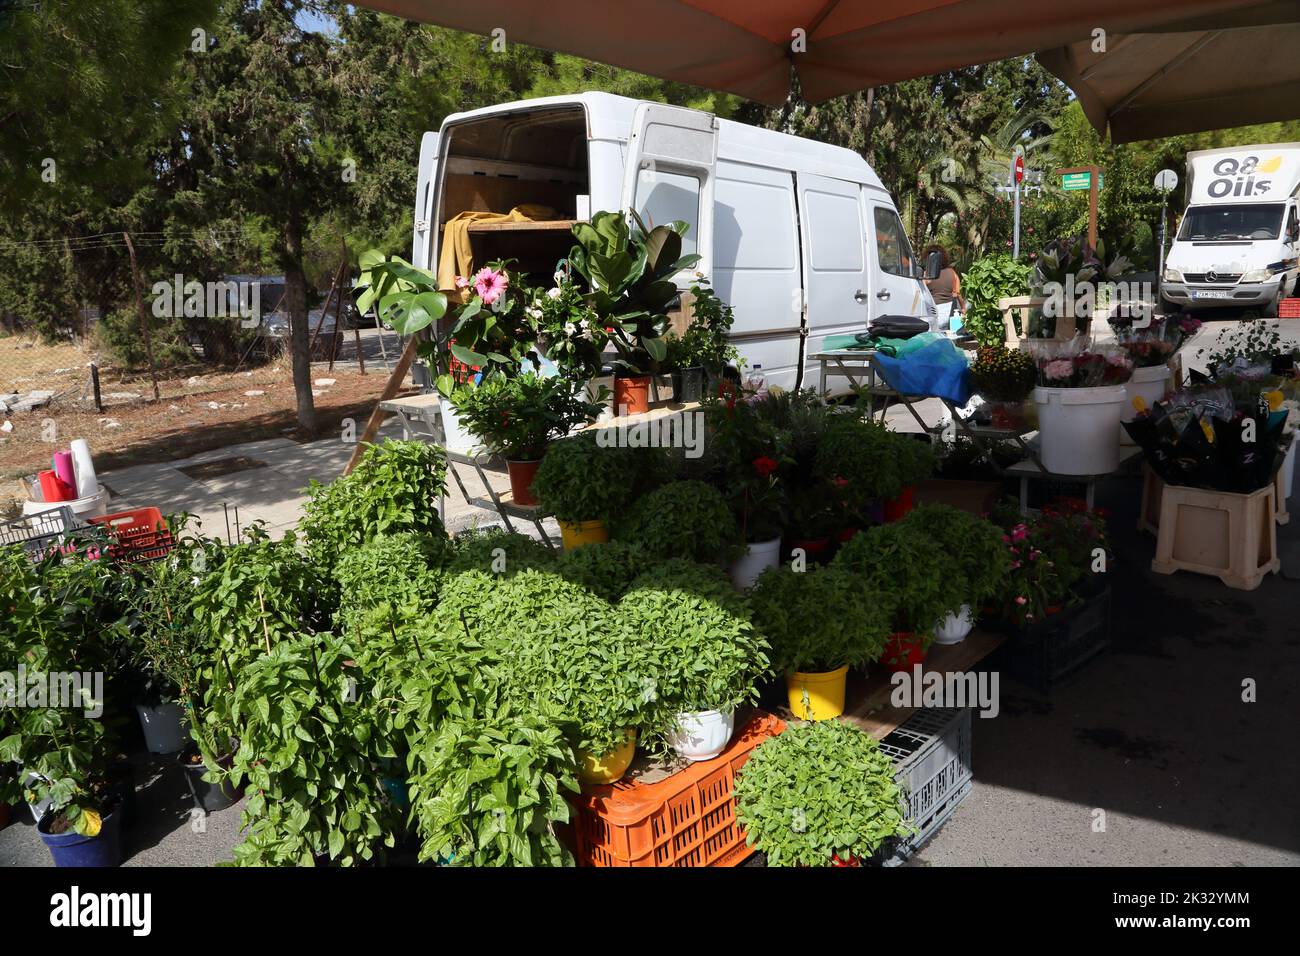 People Shopping at Saturday Market Stall Selling Flowers and Herbs Vouliagmeni Athens Greece Stock Photo